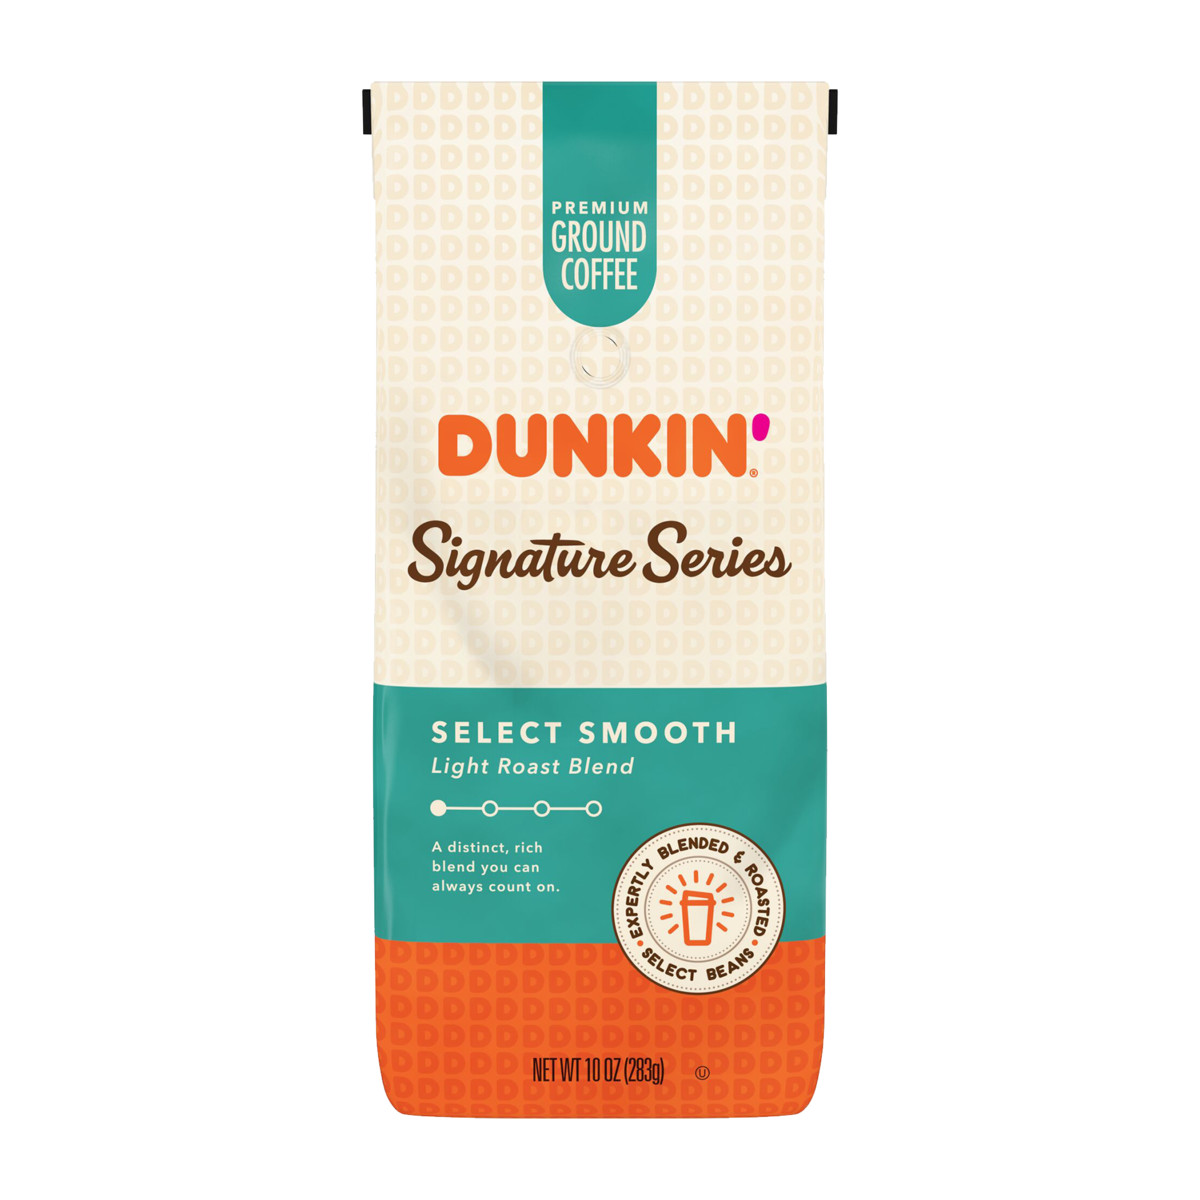 Dunkin'® Signature Series Select Smooth light roast ground coffee in an orange, green, and cream bag